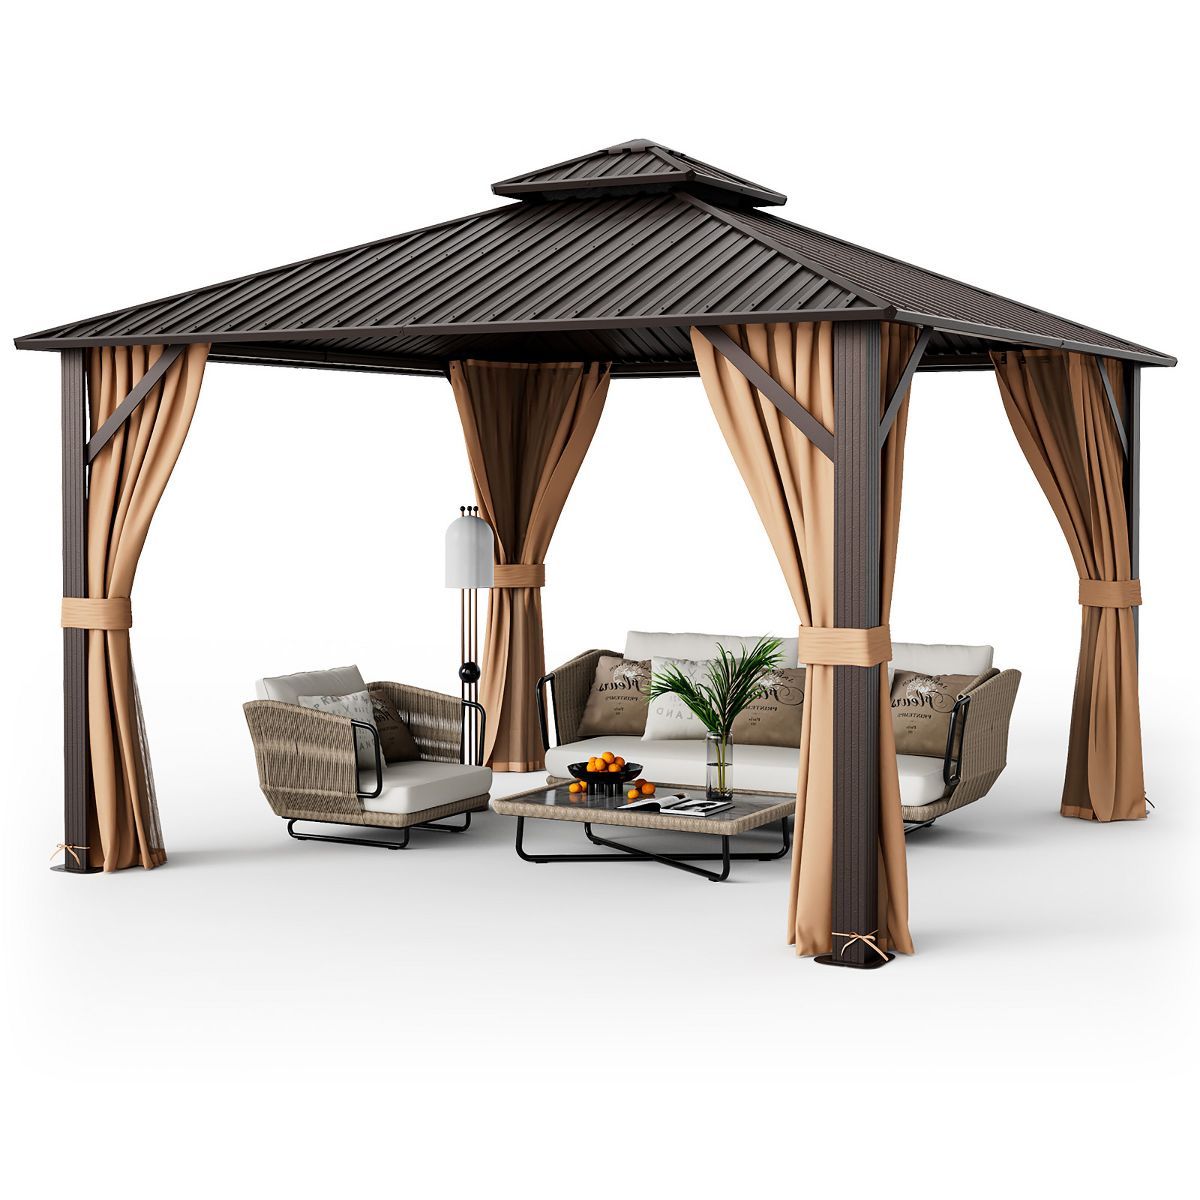 Tangkula 12' x 12' Double-Roof Hardtop Gazebo with Galvanized Steel Roof Netting Curtains | Target